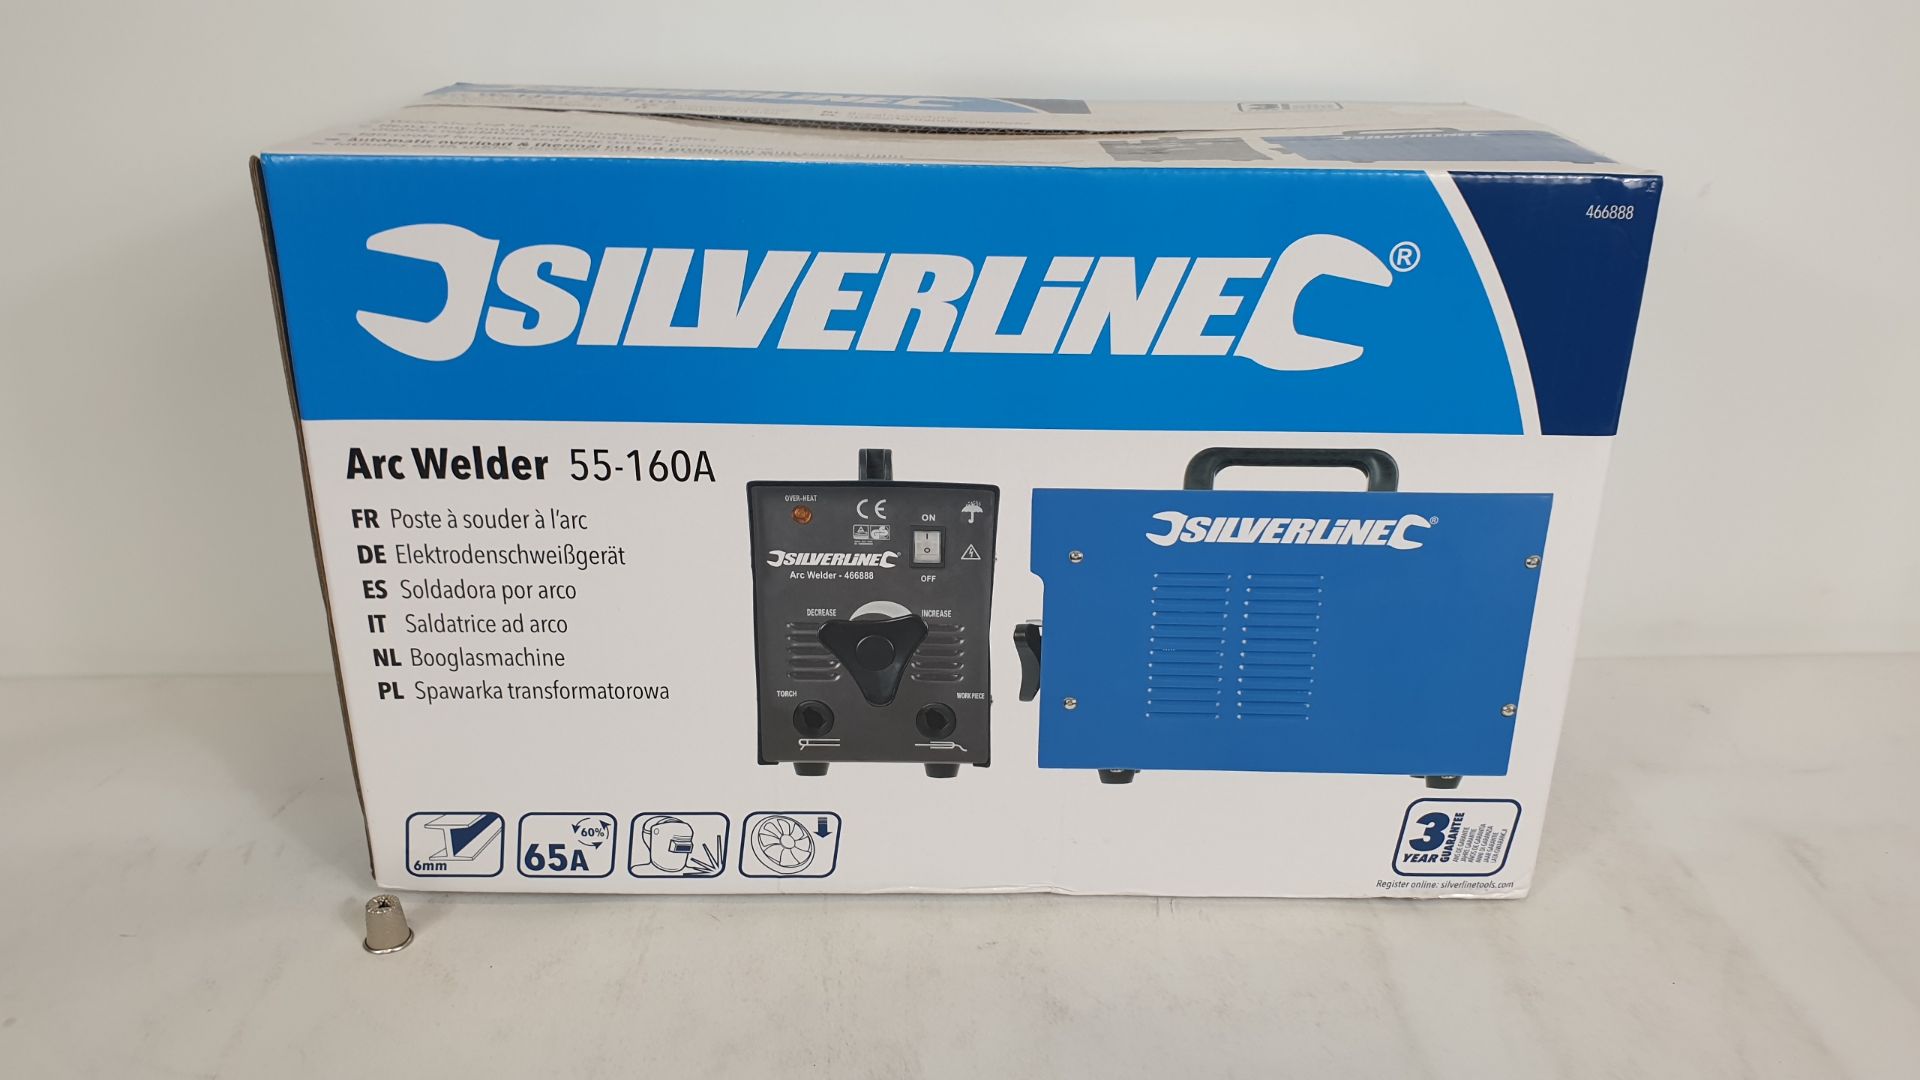 (LOT FOR THURSDAY 28TH MAY AUCTION) BRAND NEW BOXED SILVERLINE ARC WELDING SET 55 - 160A (PRODUCT